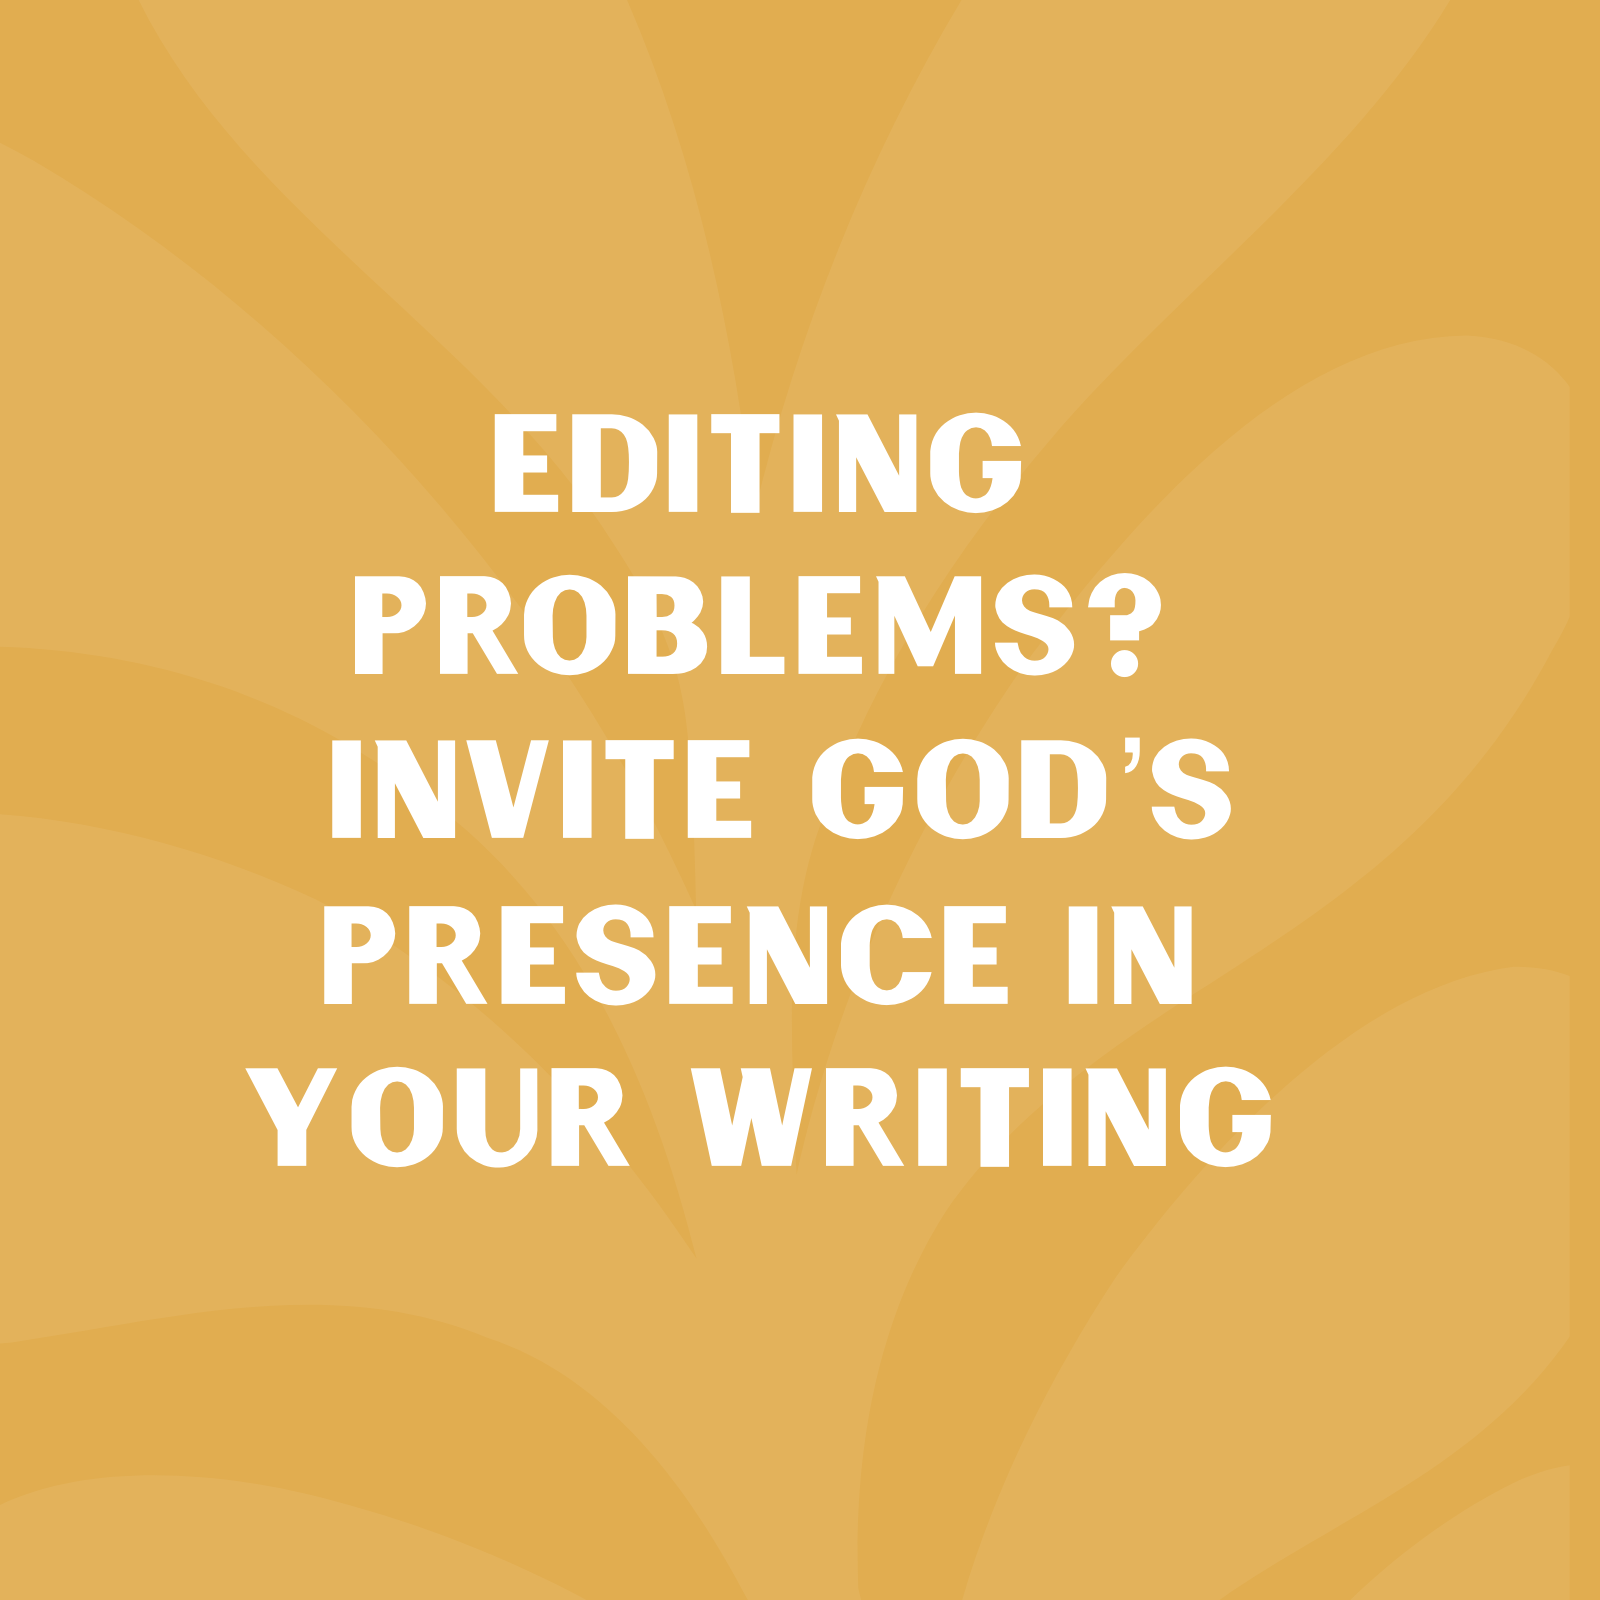 Editing Problems? Invite God’s Presence in Your Writing